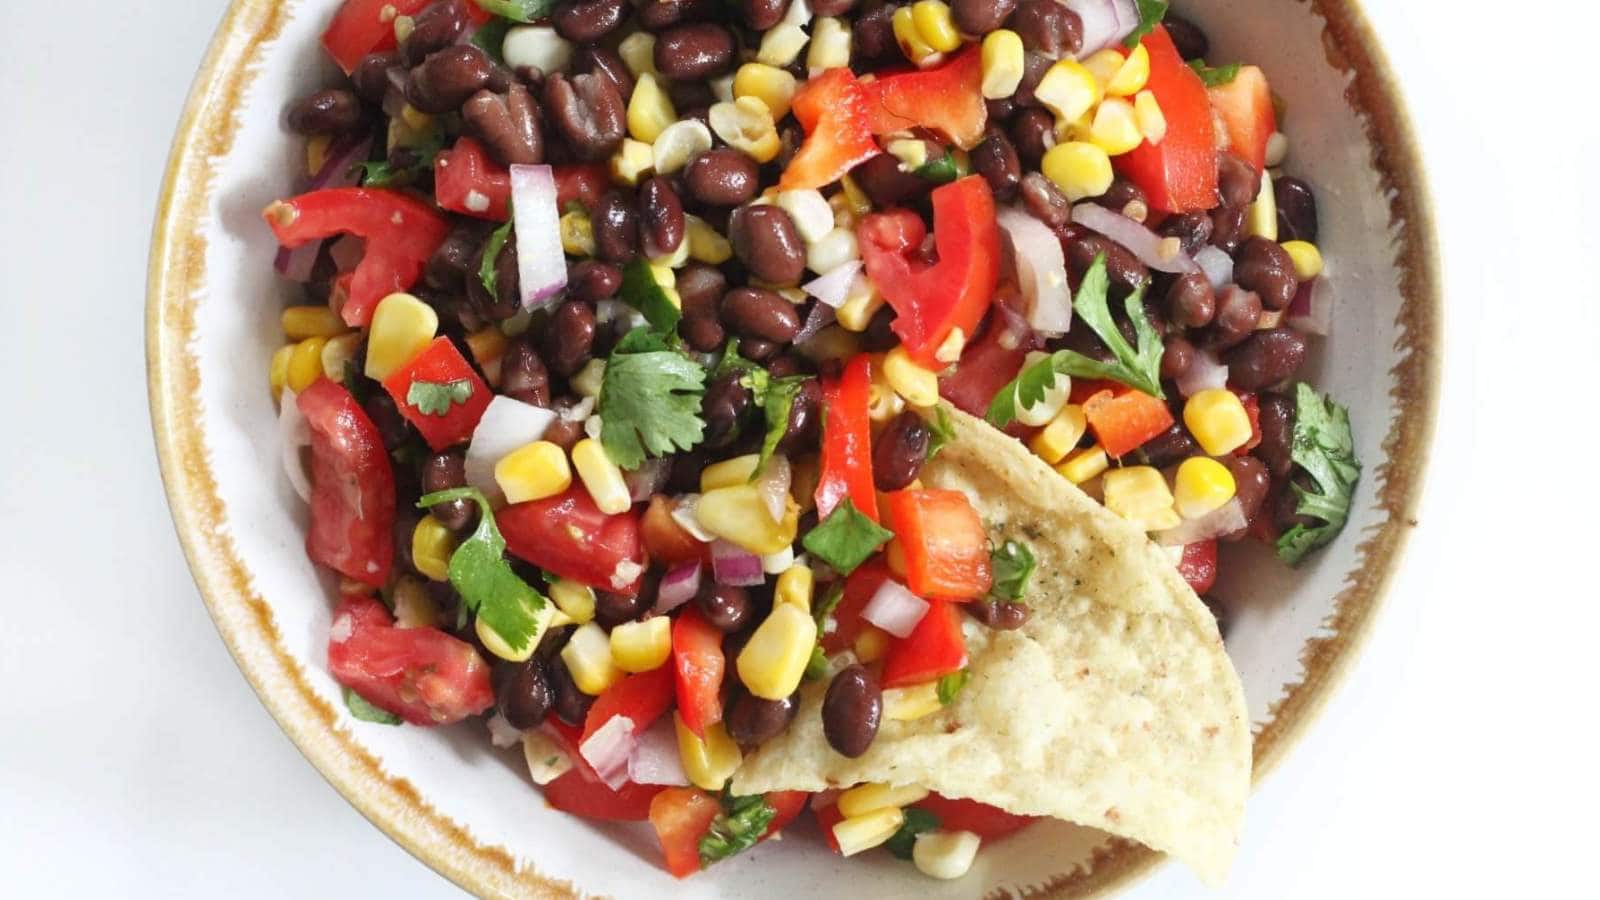 Black Bean And Corn Salsa recipe by Strength And Sunshine.